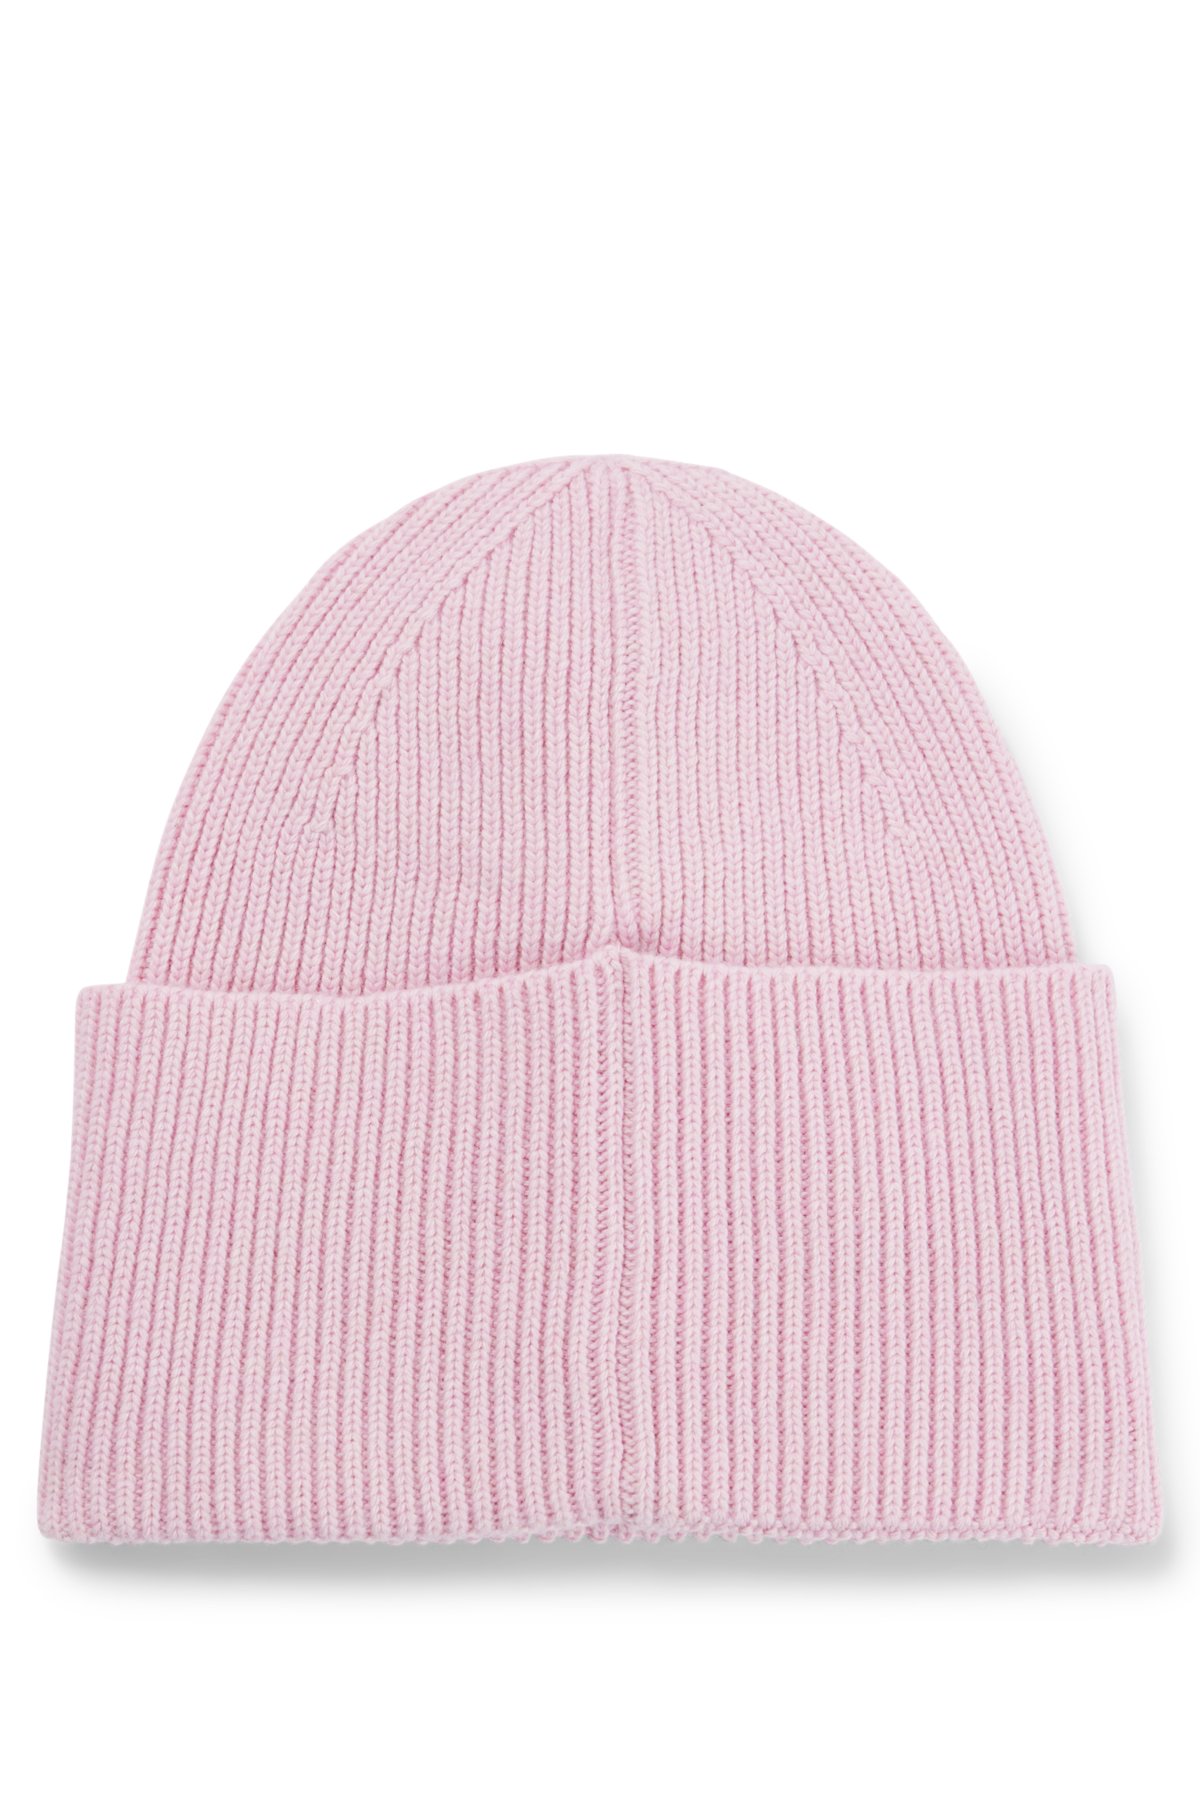 logo hat HUGO beanie red with - label Wool-blend